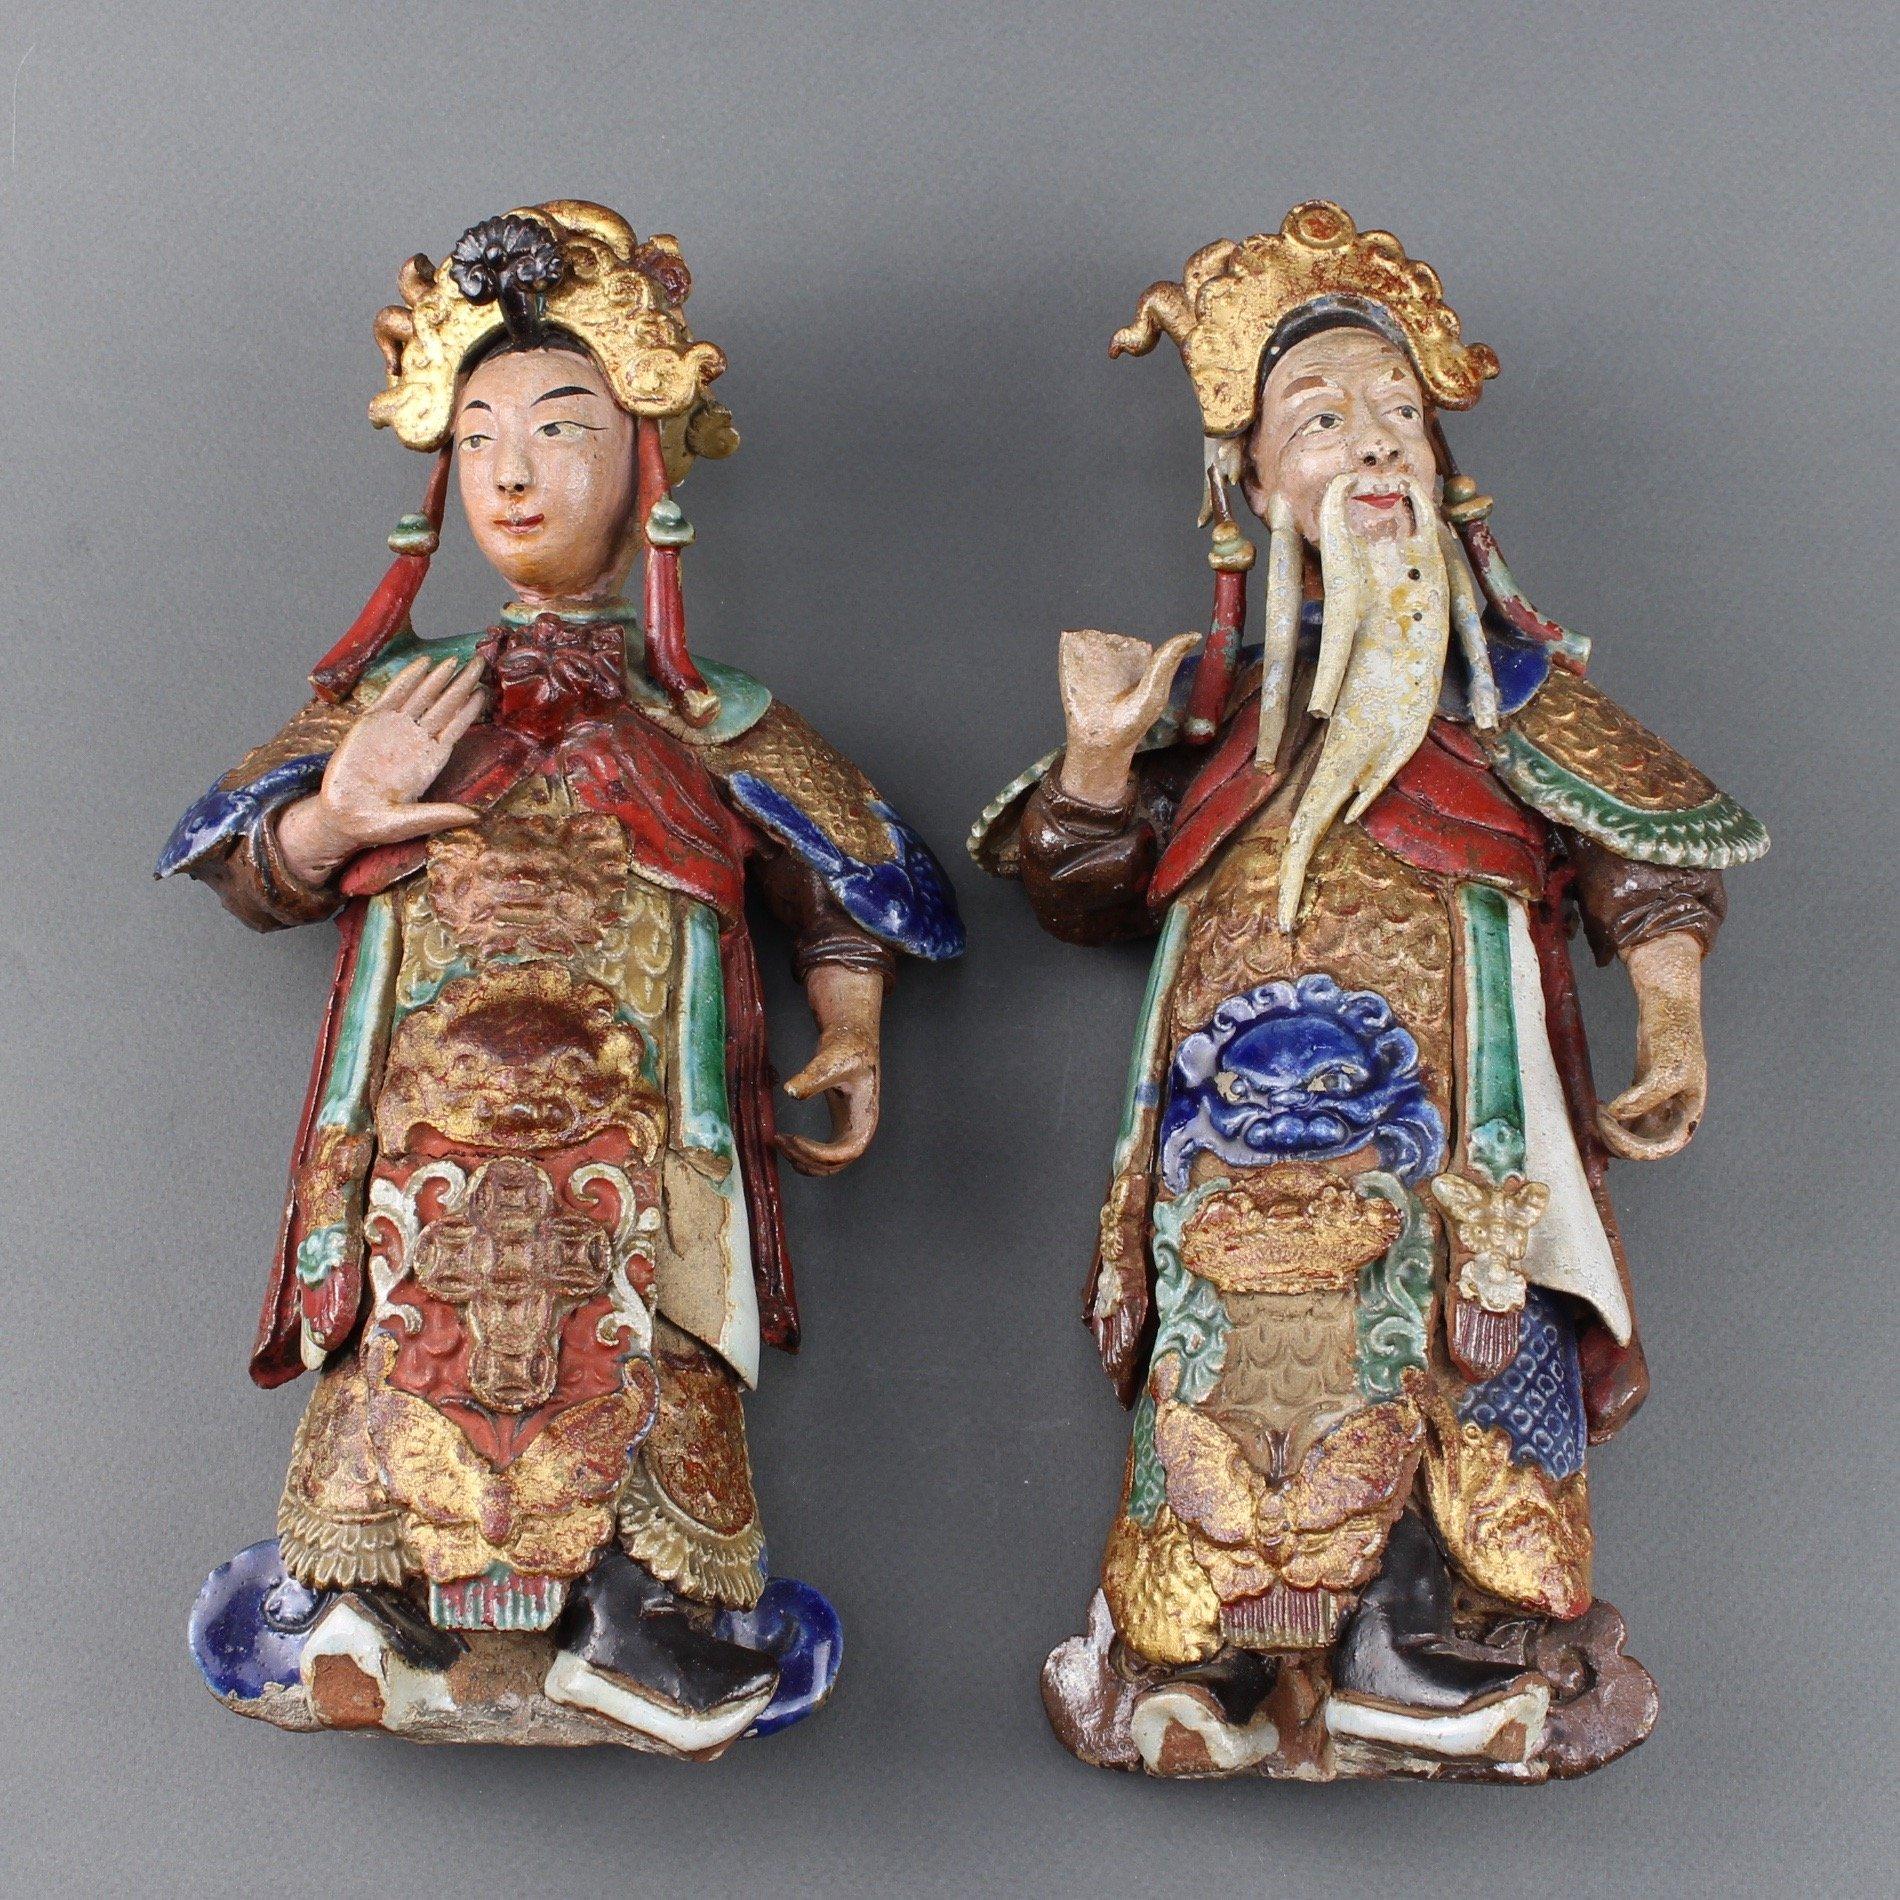 Set of two Chinese earthenware decorative wall-hanging figures (19th century). These two pieces are intriguing. Consulted experts in Asian artworks indicate they were most likely made in Canton, China for European export in the 19th century. They